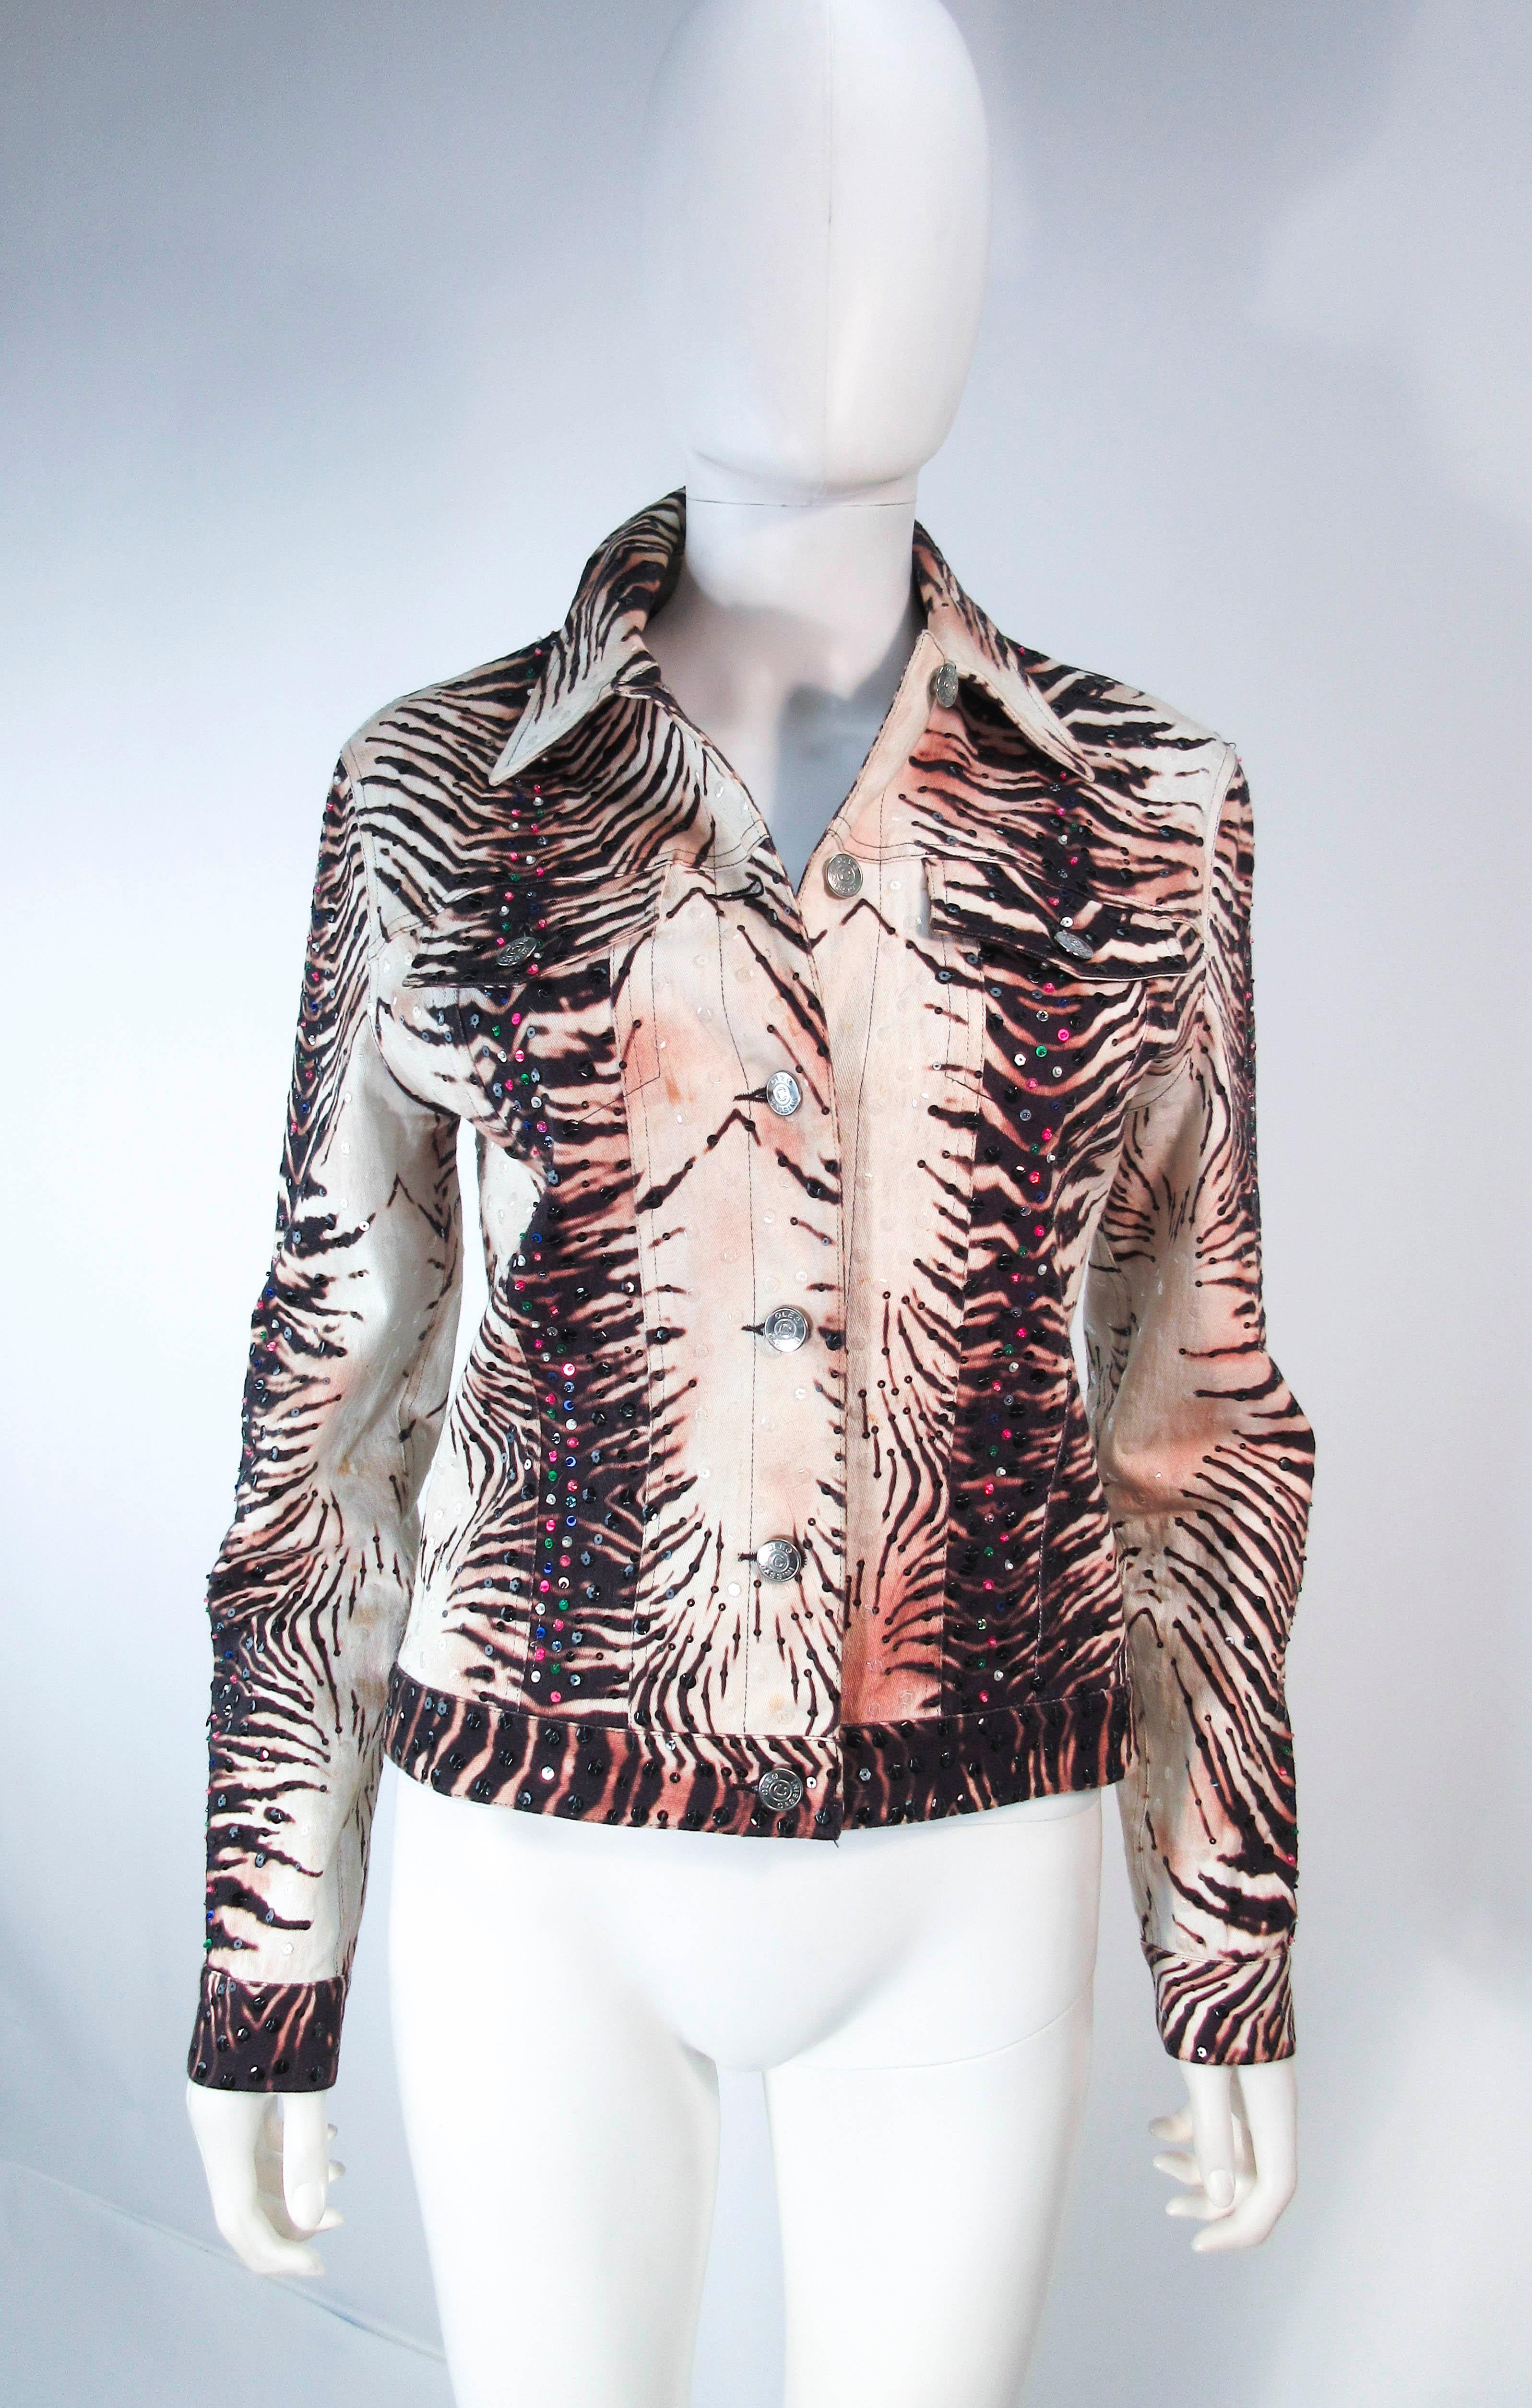 This Oleg Cassini jacket is composed of an animal print denim fabric. Features sequin applique throughout & center front zipper closure with front pockets. In excellent vintage condition, some light signs of wear due to age.

**Please